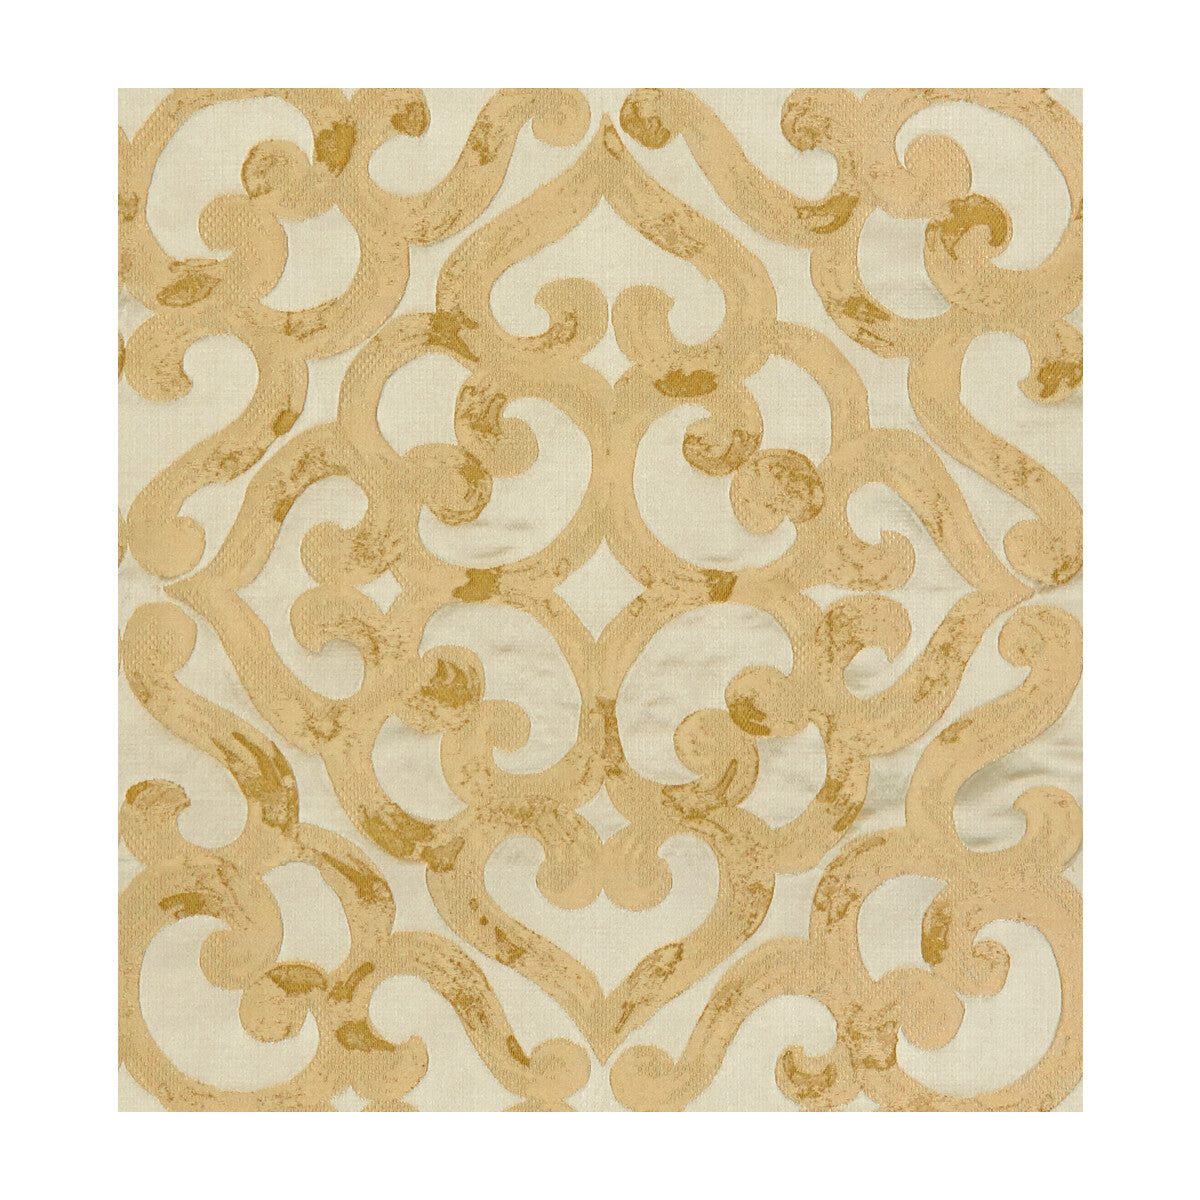 Kurrajong fabric in gold color - pattern 33799.416.0 - by Kravet Design in the Candice Olson collection